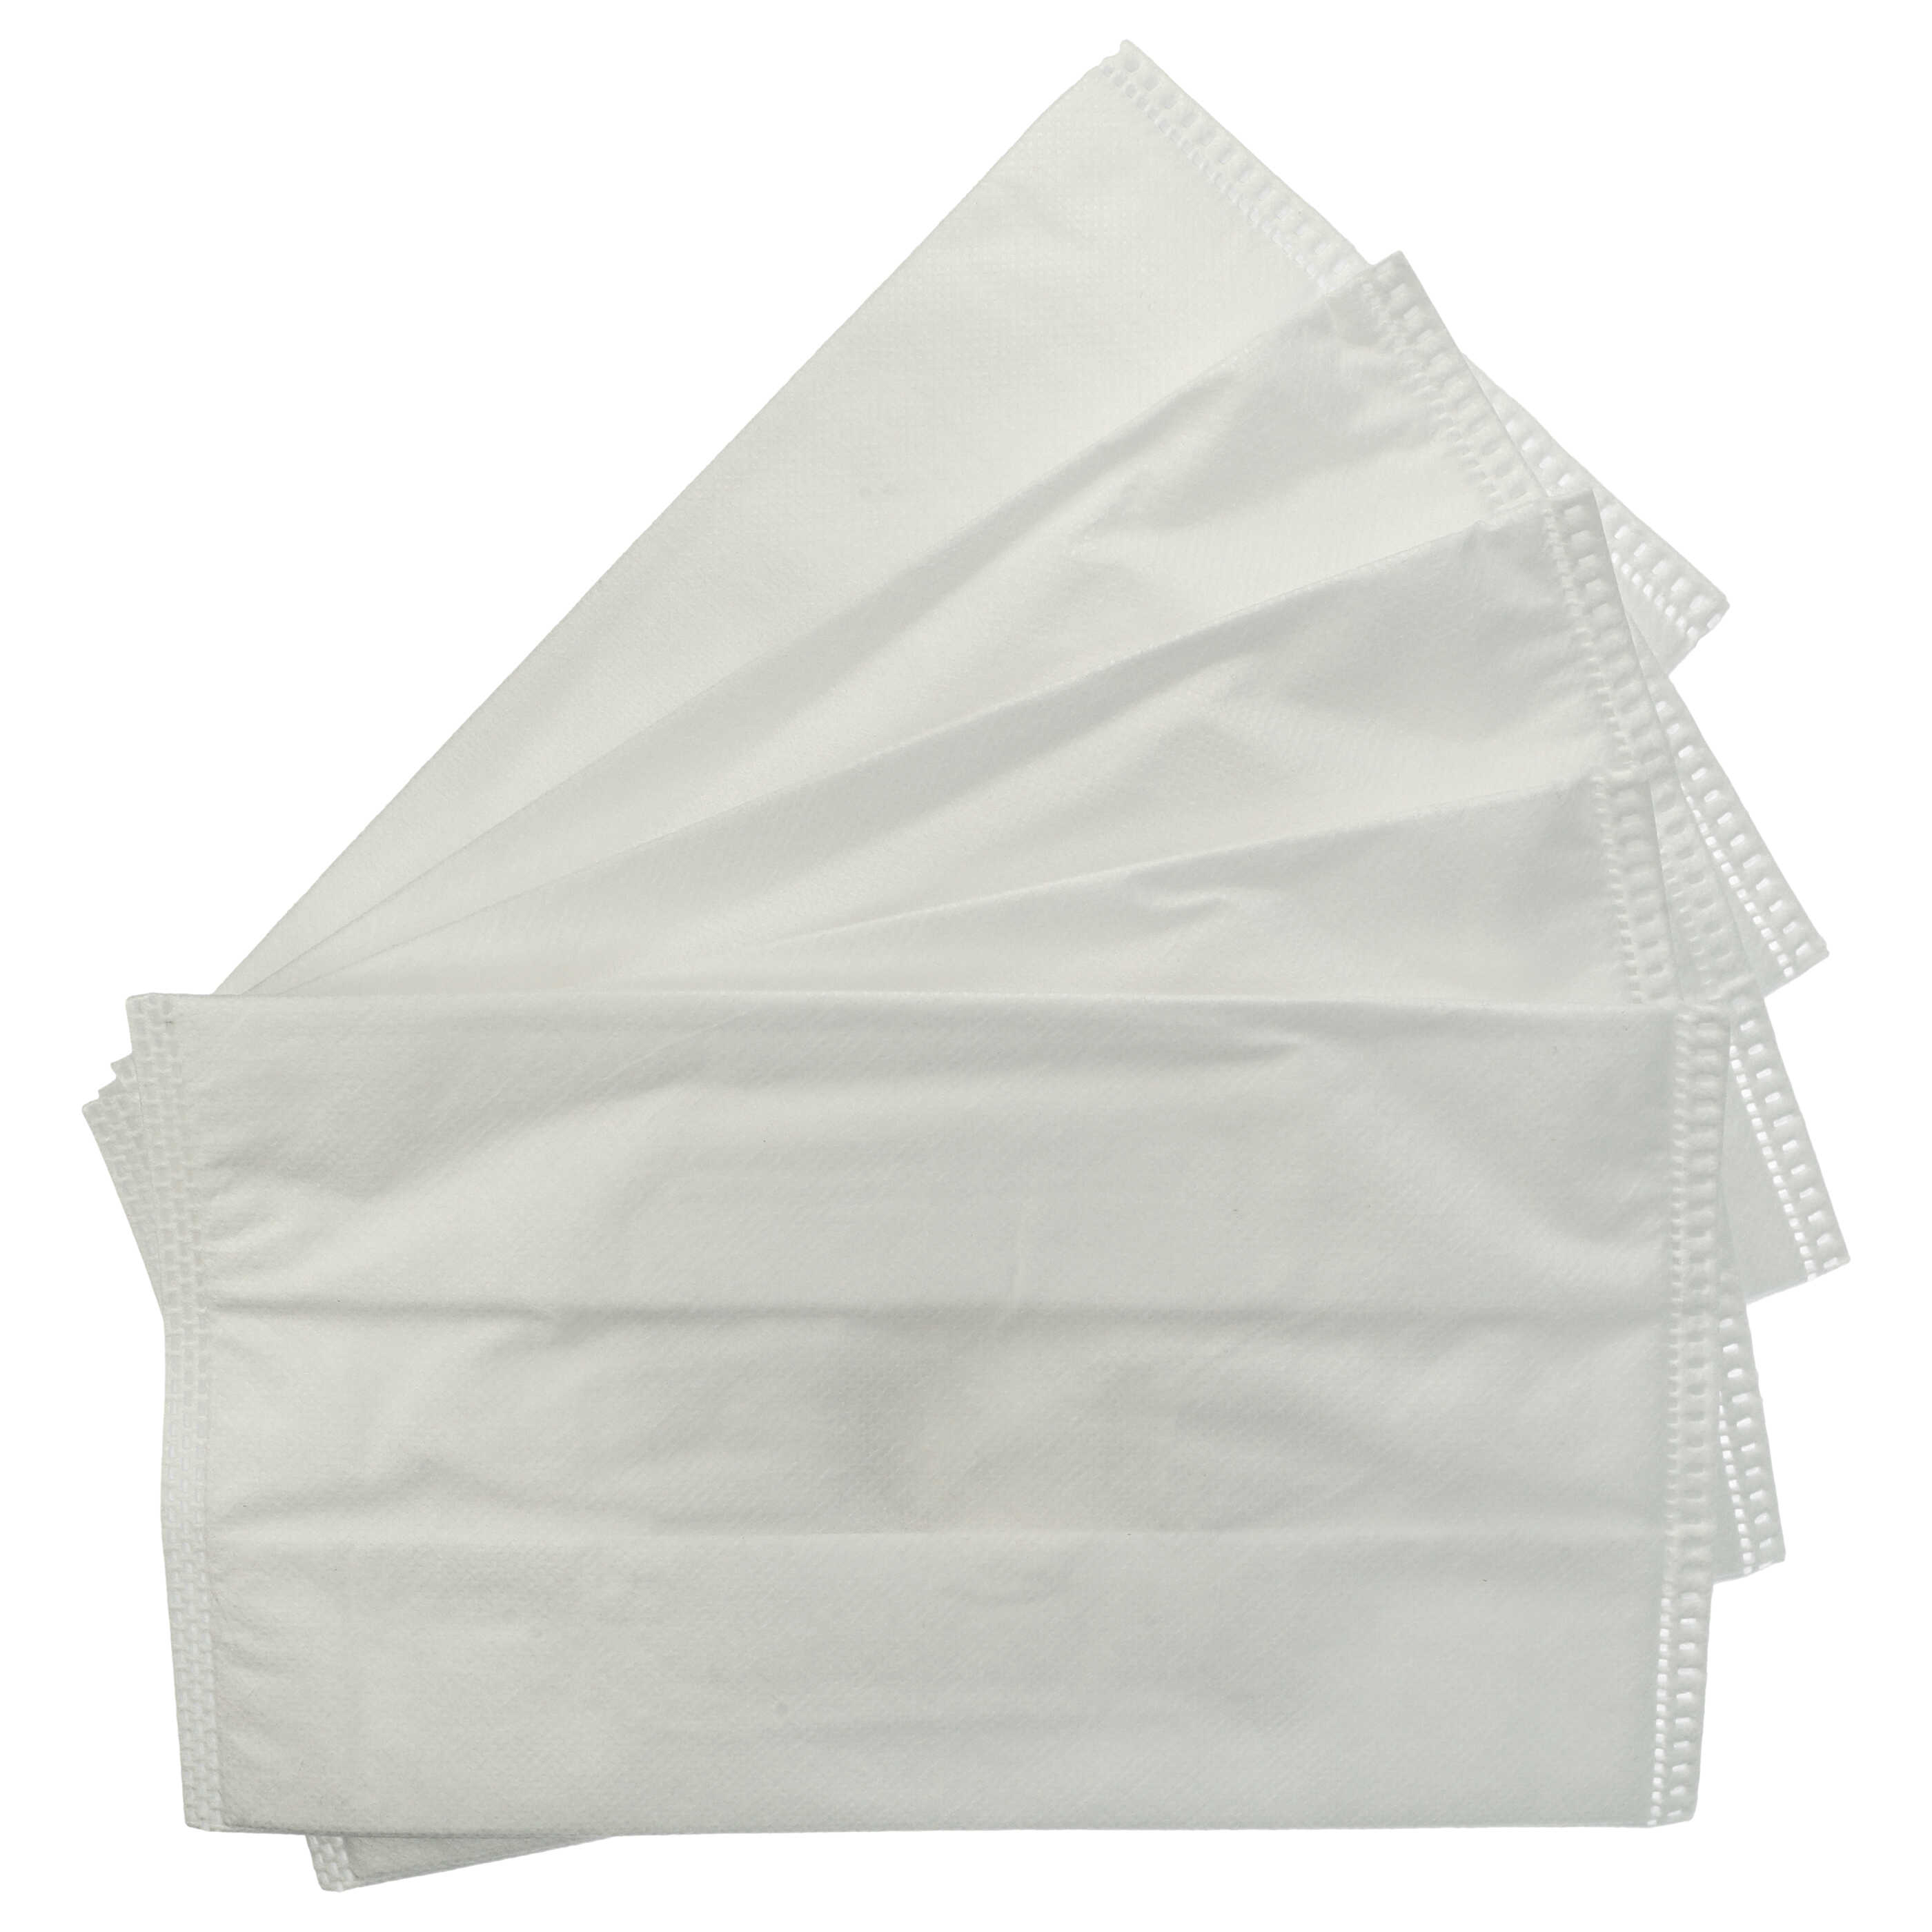 5x Vacuum Cleaner Bag replaces AEG 9001684753, GR203S, 900166039/9 for Philips - microfleece / cardboard